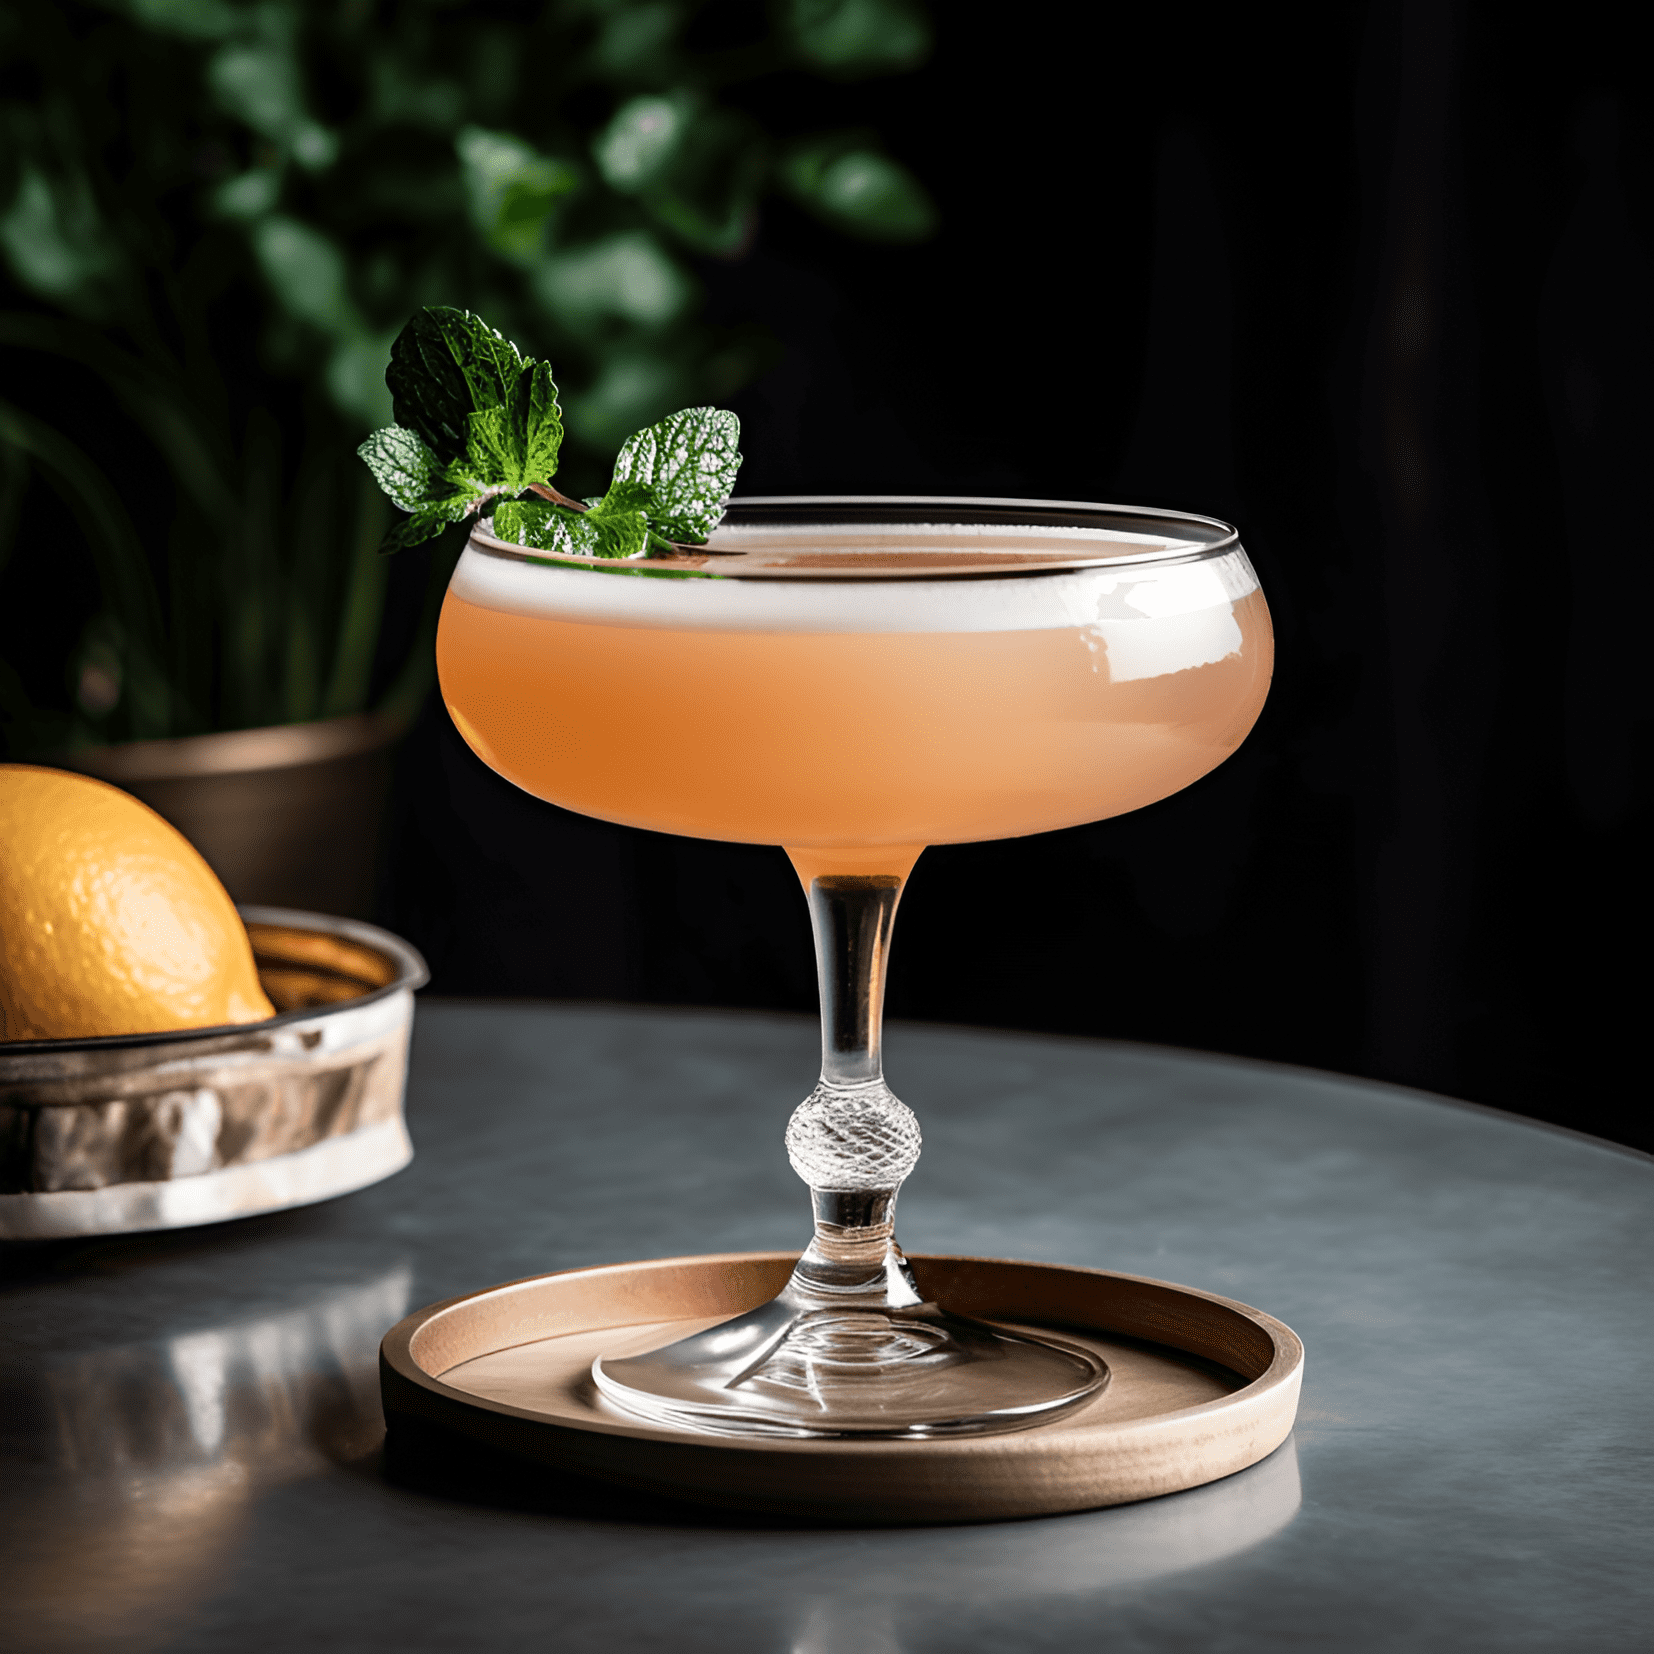 Pomelo Cocktail Recipe - The Pomelo Cocktail has a bright, tangy, and slightly sweet taste. The citrusy notes from the pomelo are balanced by the sweetness of the simple syrup and the slight bitterness of the grapefruit. The overall flavor is refreshing, light, and invigorating.